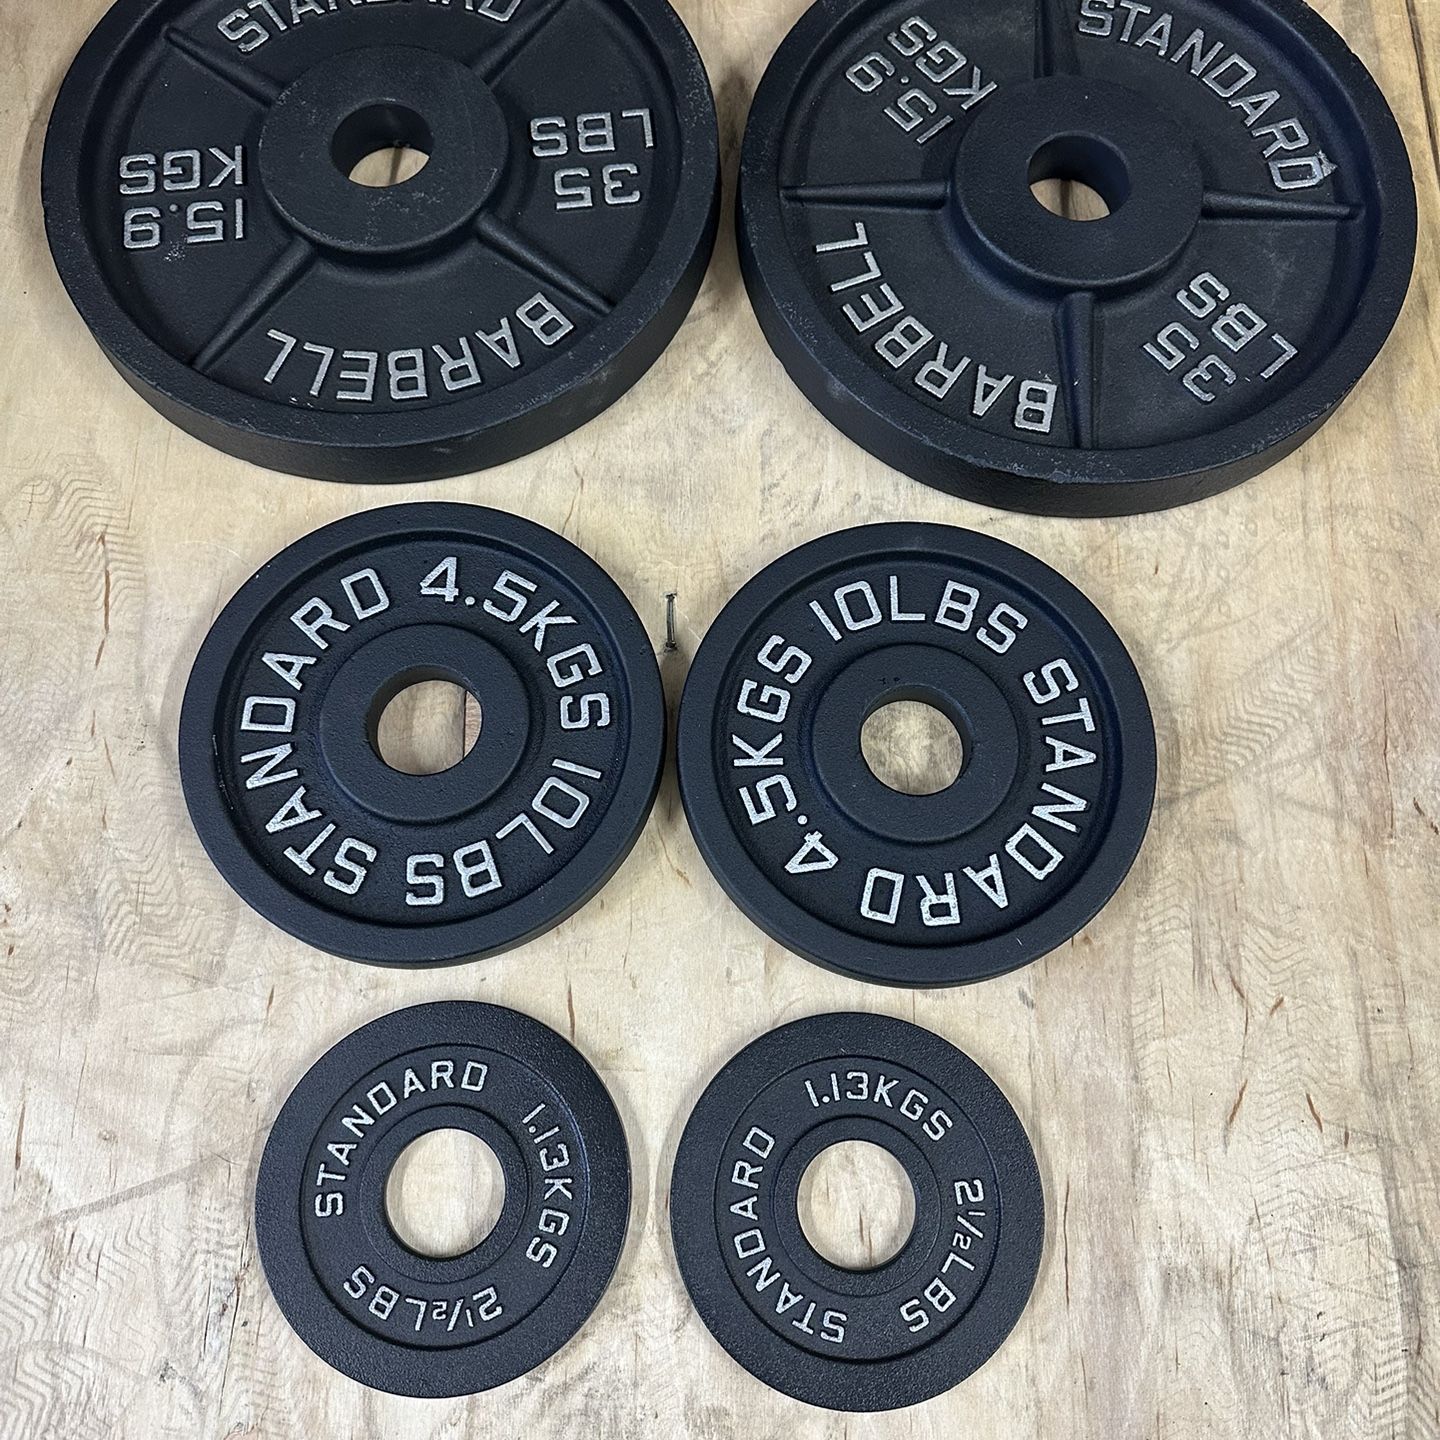 95 Pound Olympic Plate Set Brand New Still In The Box We Have Three Sets Left In Stock